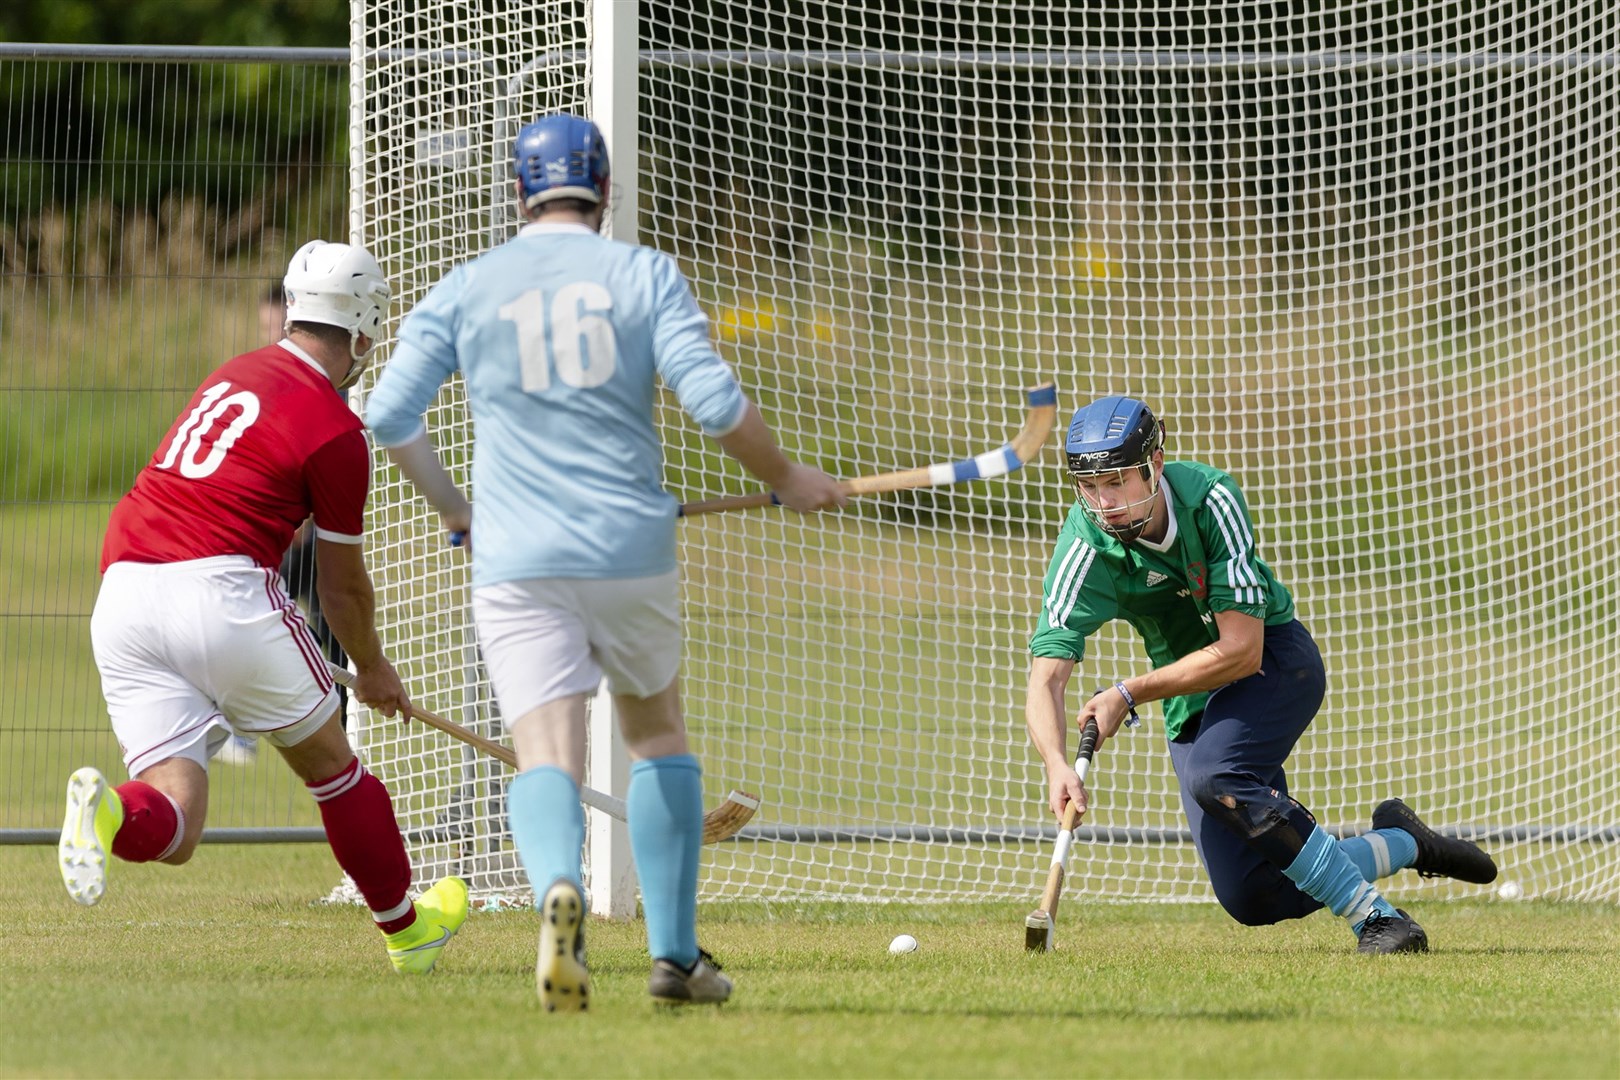 Goalkeeper Ewan Pilcher is one man who will definitely not be playing for Caberfeidh against Kingussie. Picture: Neil Paterson